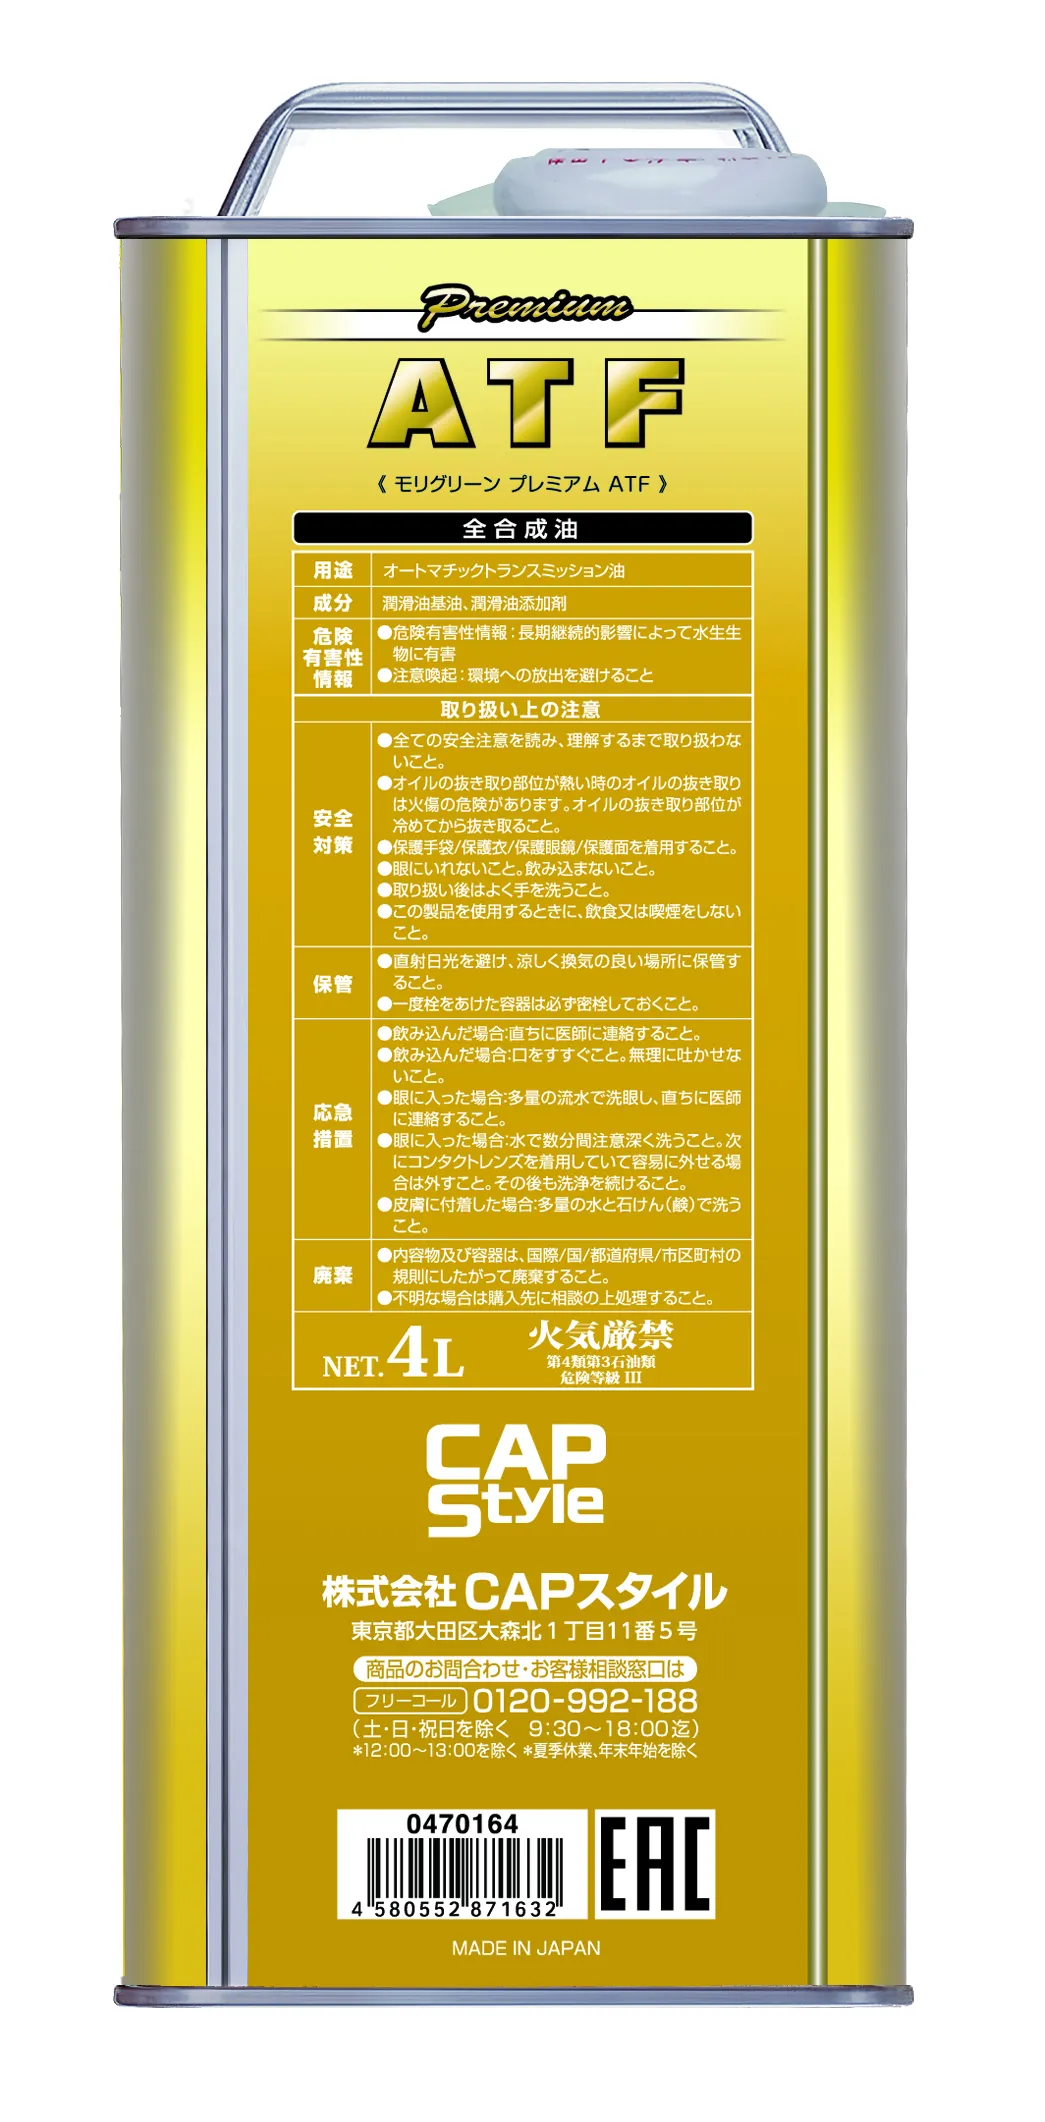 Japan high quality and reliability motor engine lubricant oil